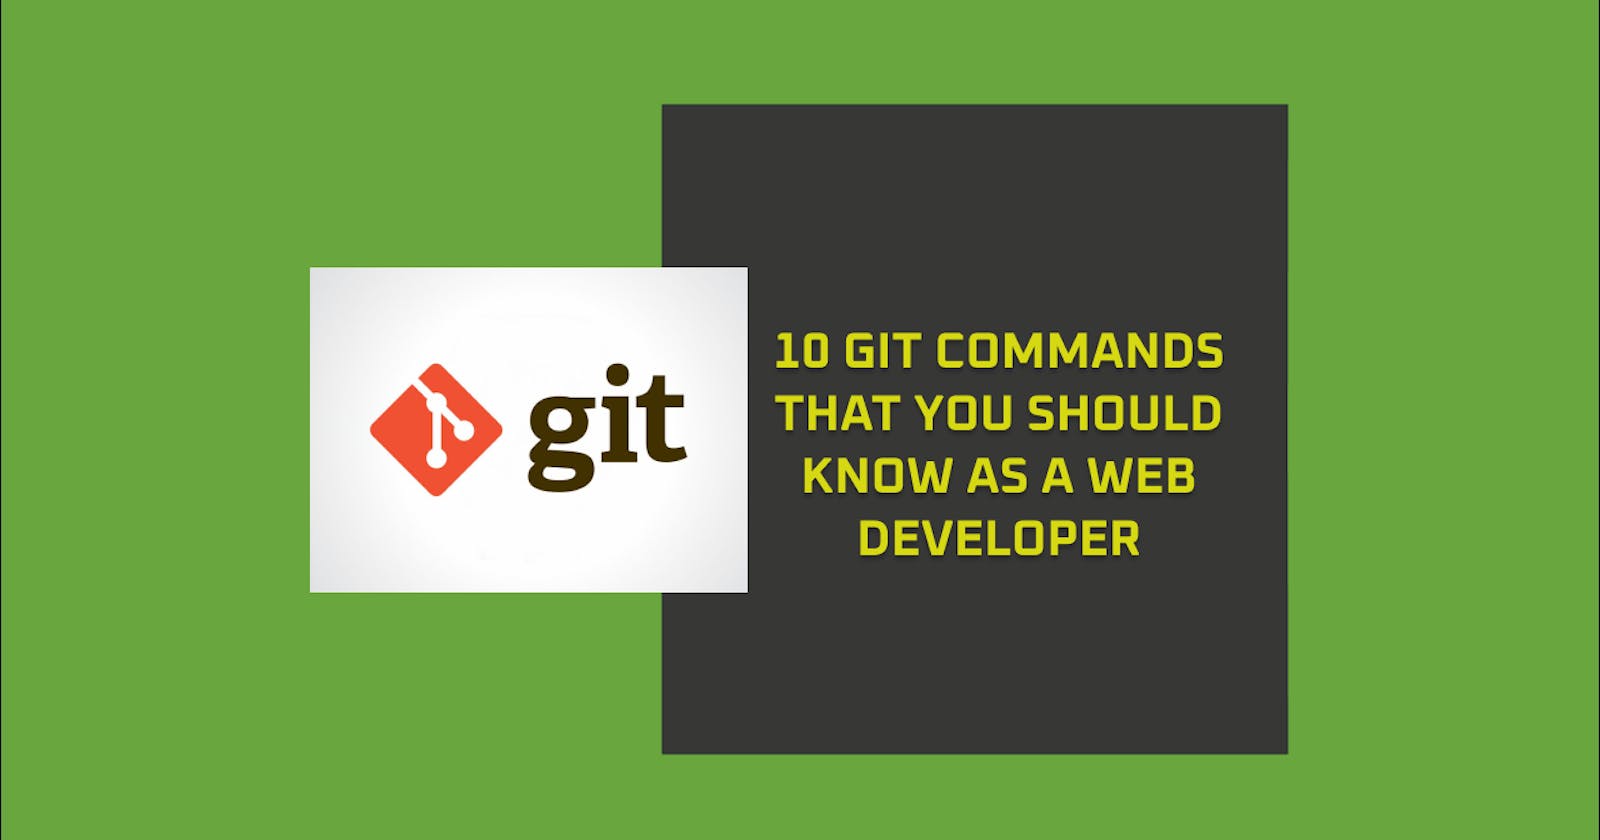 10 Git commands that you should know